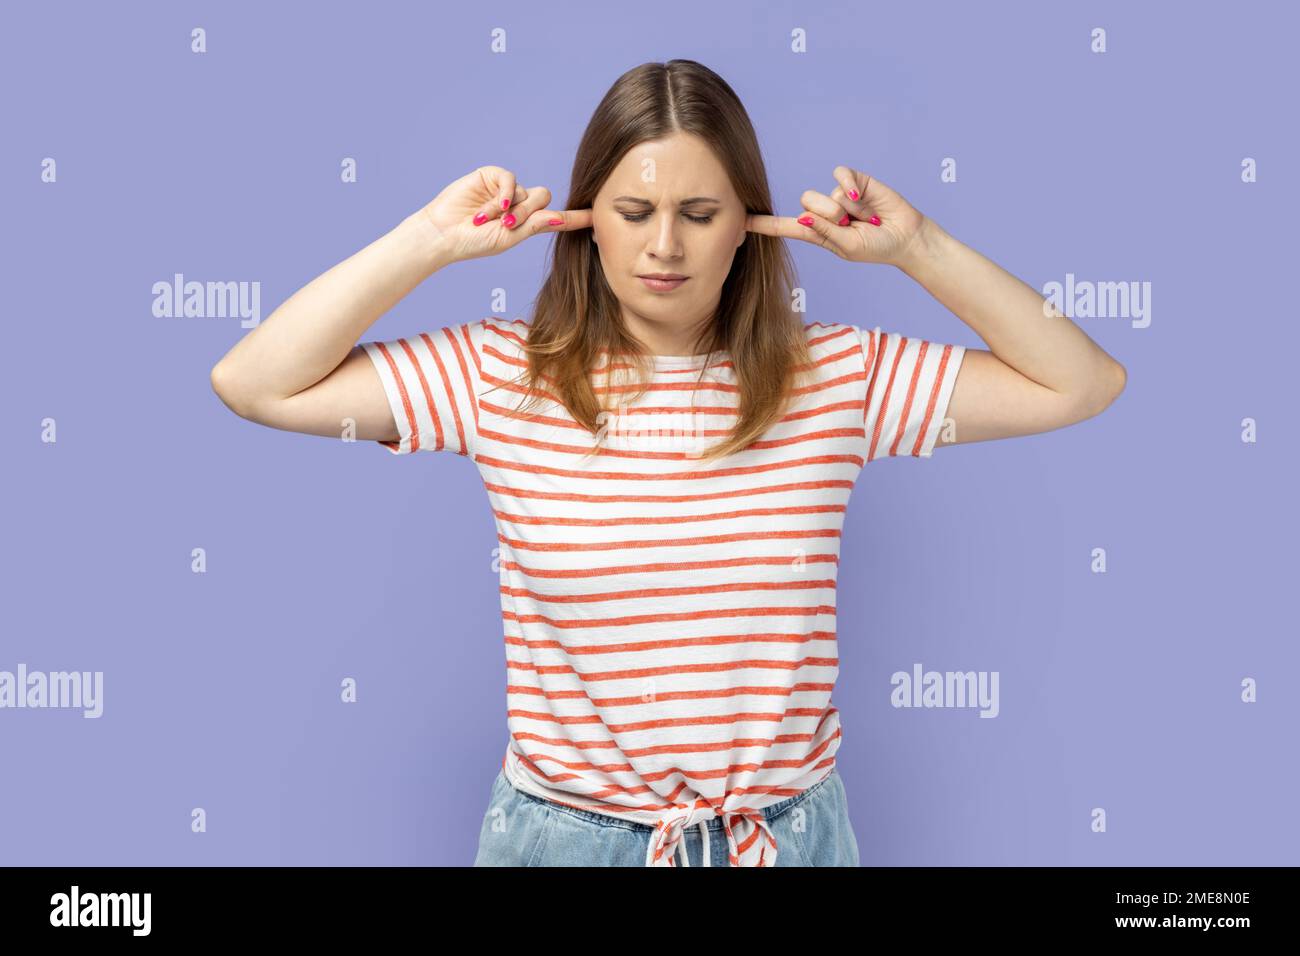 Portrait of depressed attractive blond woman wearing striped T-shirt standing covering ears with fingers, being irritated by noise, closed her eyes. Indoor studio shot isolated on purple background. Stock Photo